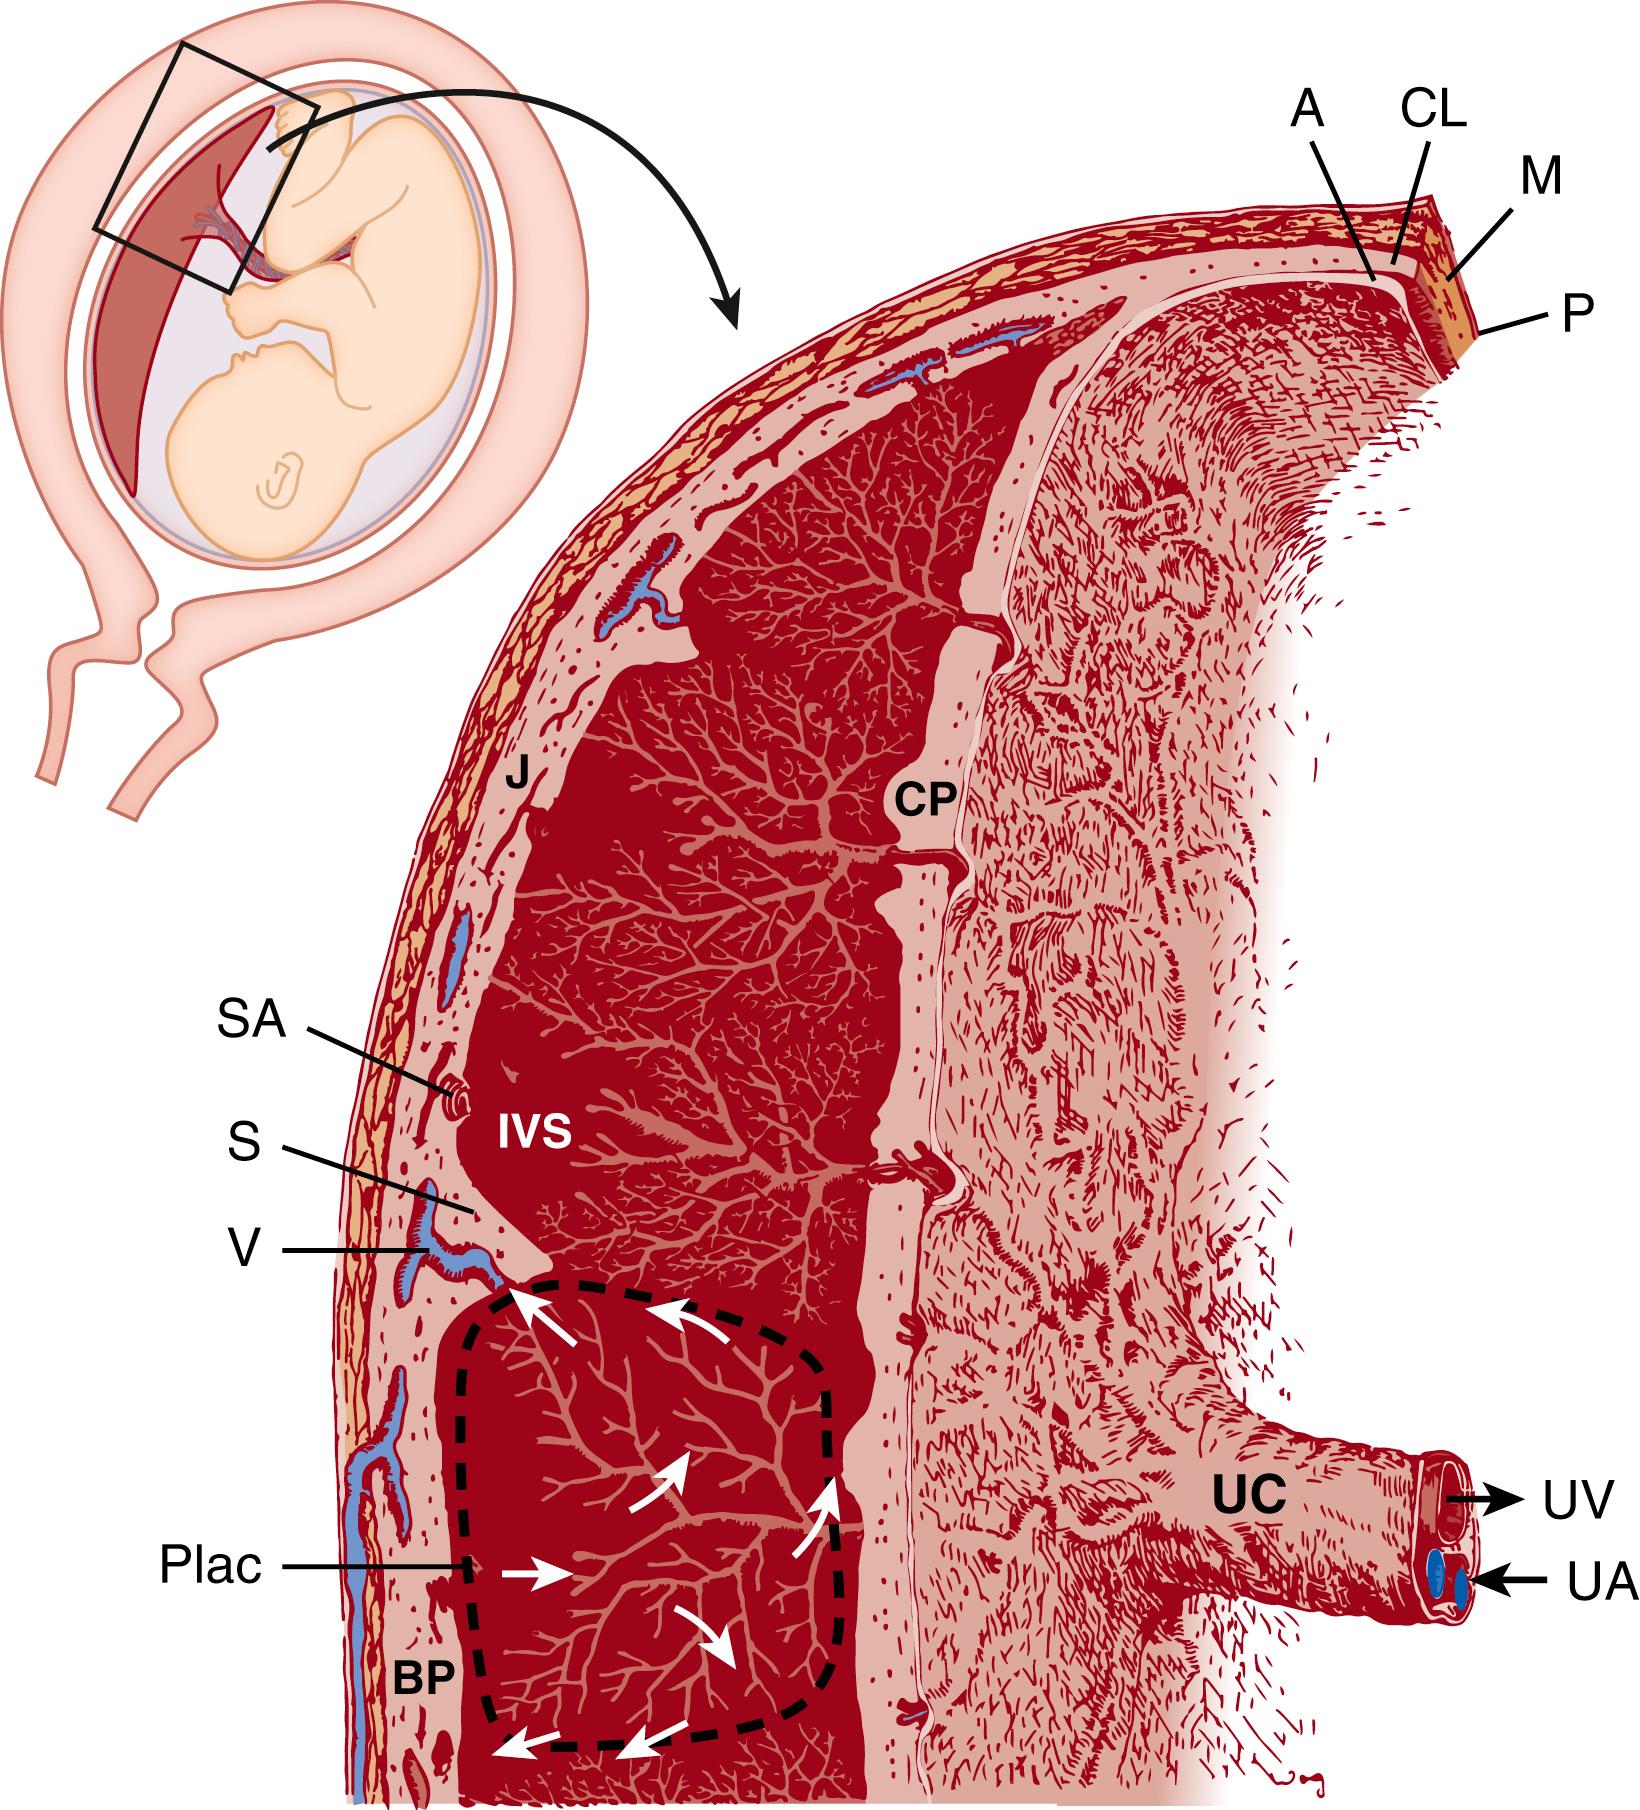 Fig. 8.1, Survey diagram of the mature human placenta in situ. Villous trees arranged around maternal arterial flow from spiral arteries are a central feature of the placenta. Inflowing maternal blood circulates within the intervillous space (arrows) , bathing the villous trees, and exits through maternal veins. A, Amnion; BP, basal plate; CL, chorion laeve; CP, chorionic plate; IVS, intervillous space; J , junctional zone; M, myometrium; P, perimetrium; Plac , placentome; S, placental septum; SA , maternal spiral artery; UA, umbilical artery; UC, umbilical cord; UV, umbilical vein; V , maternal vein.